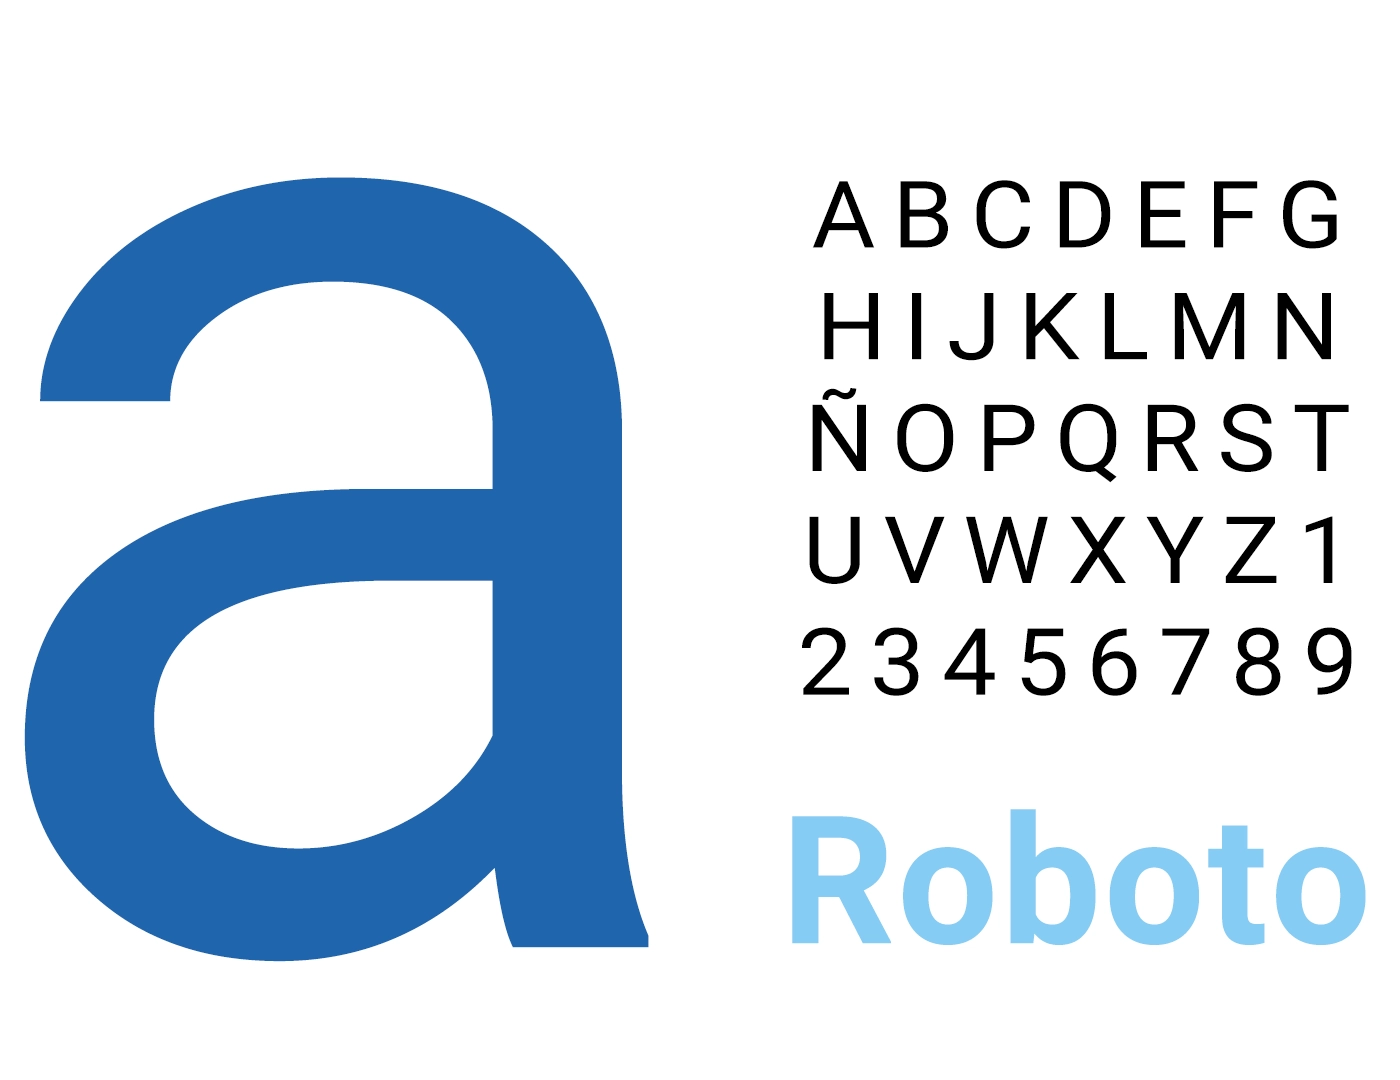 Font selection of Roboto in regular and bold.